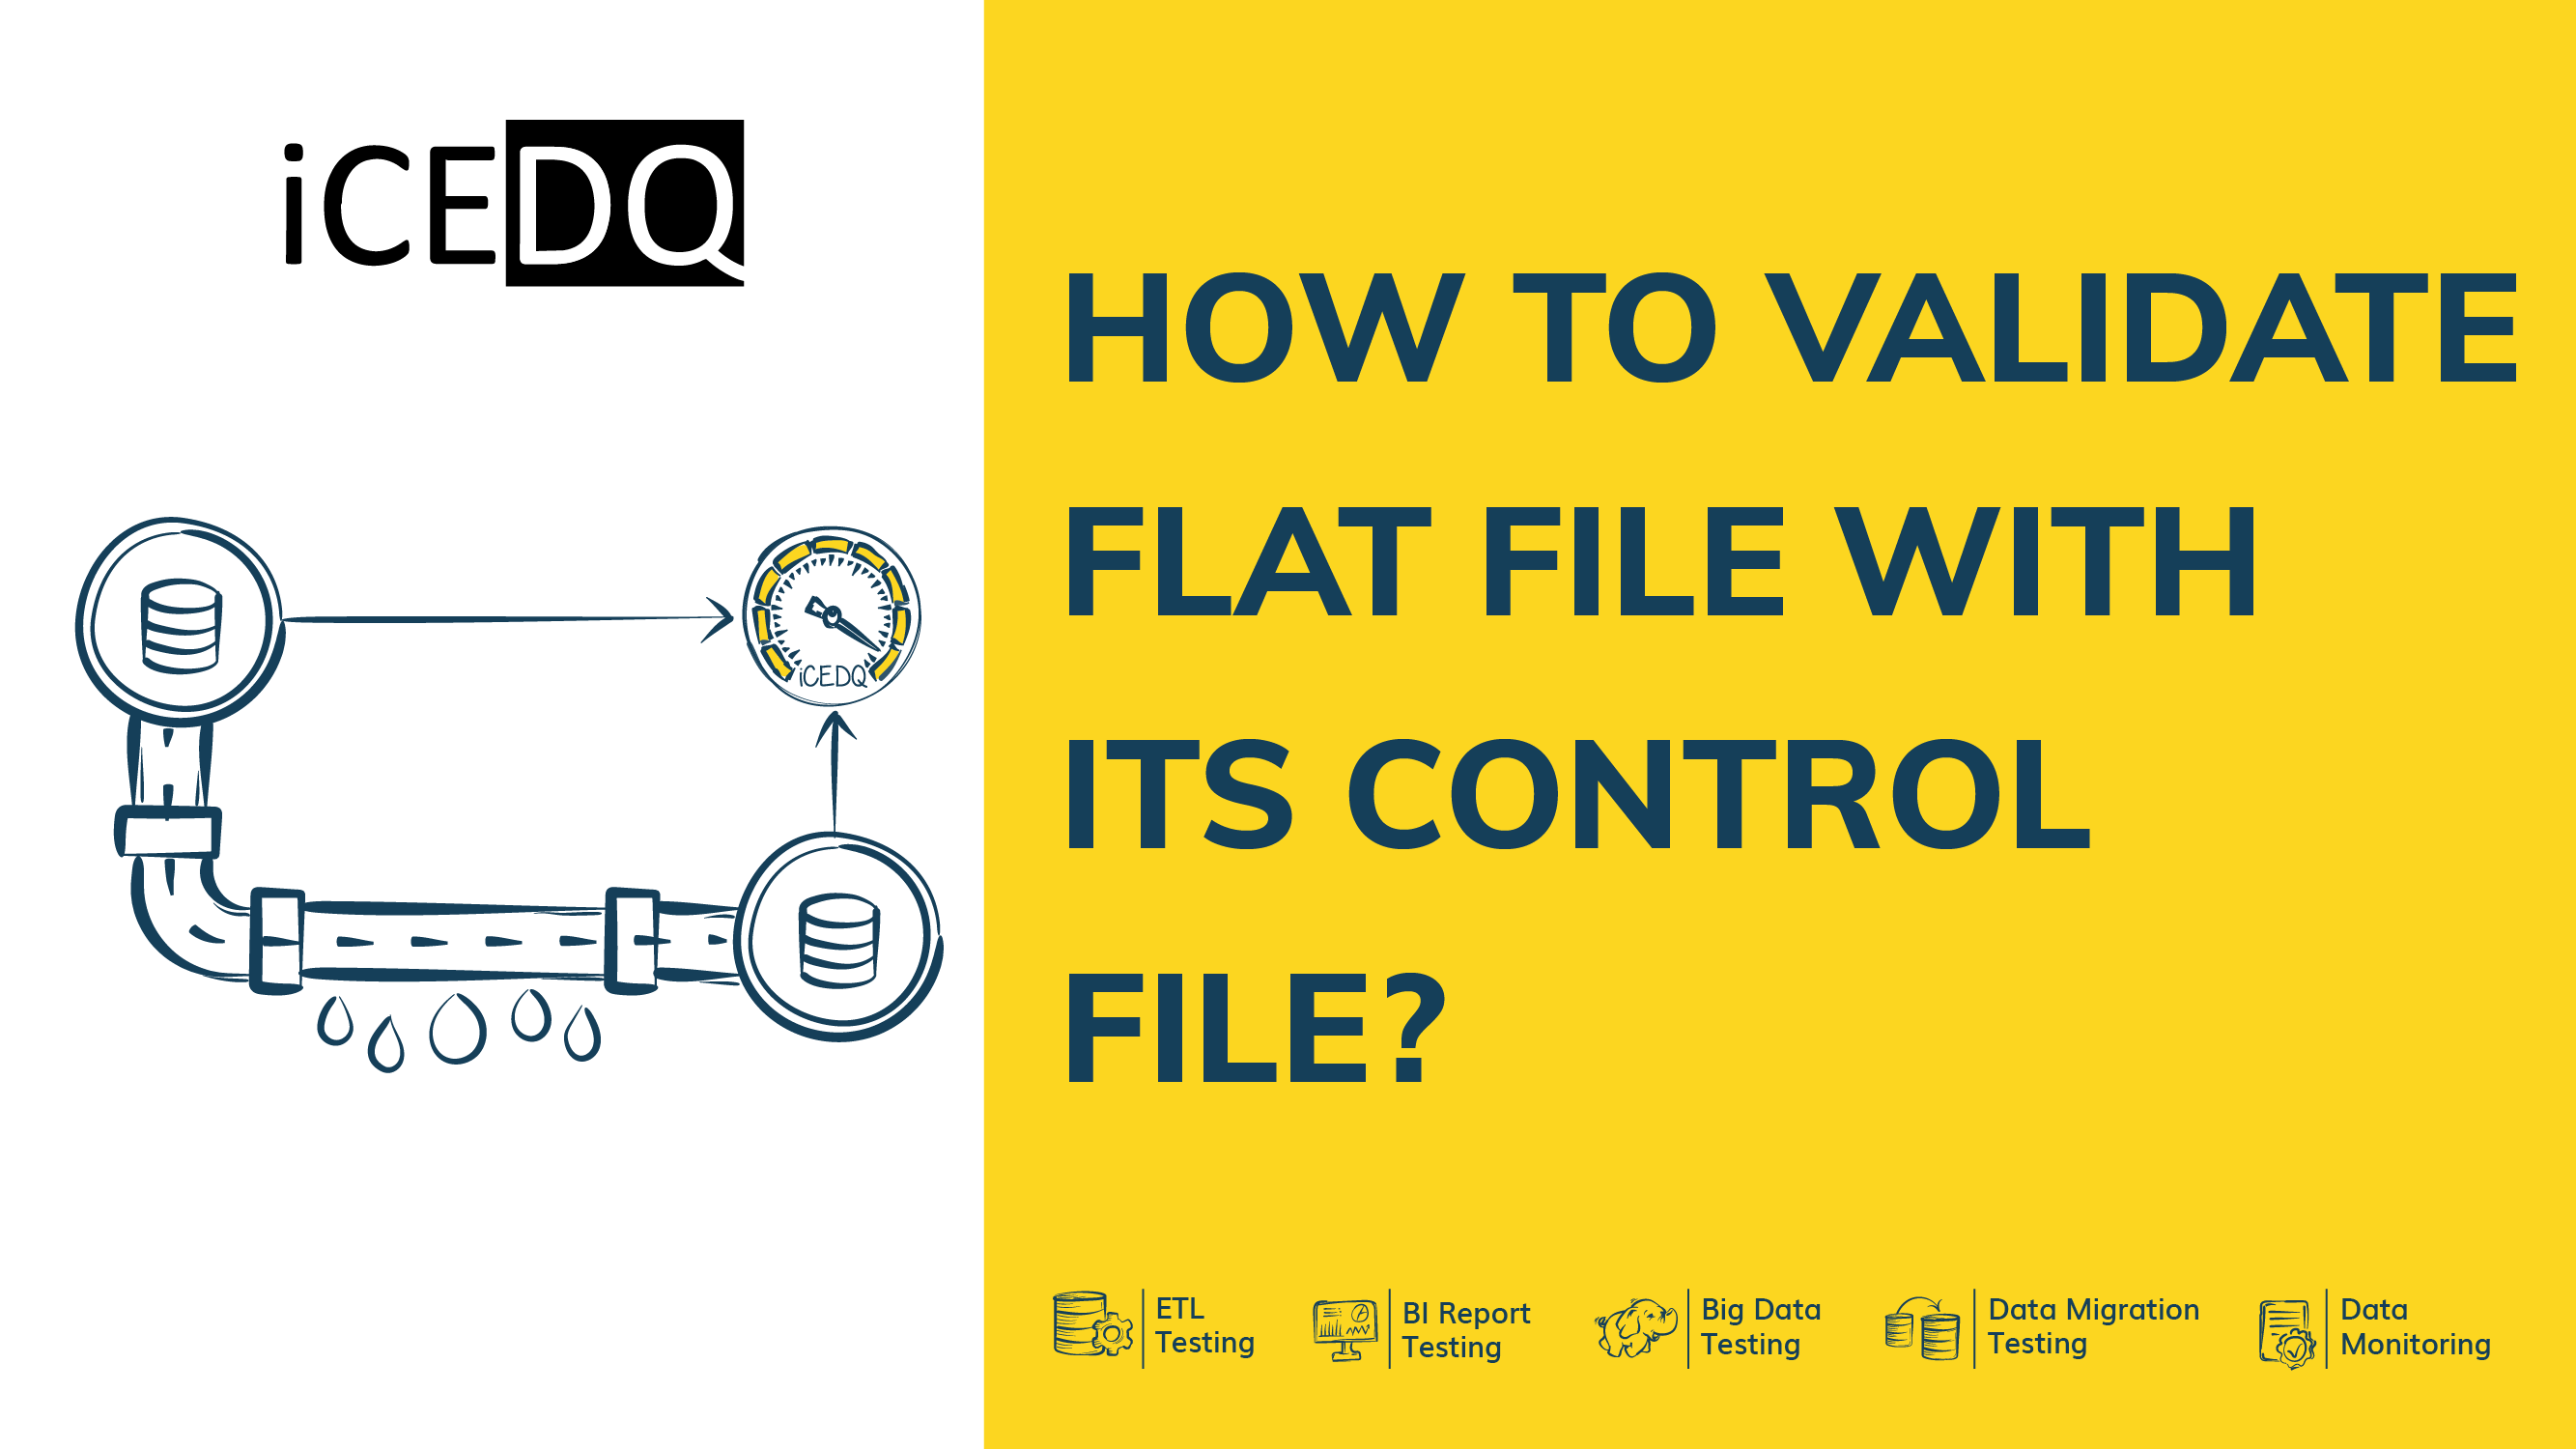 How to Validate Flat File with its Control File